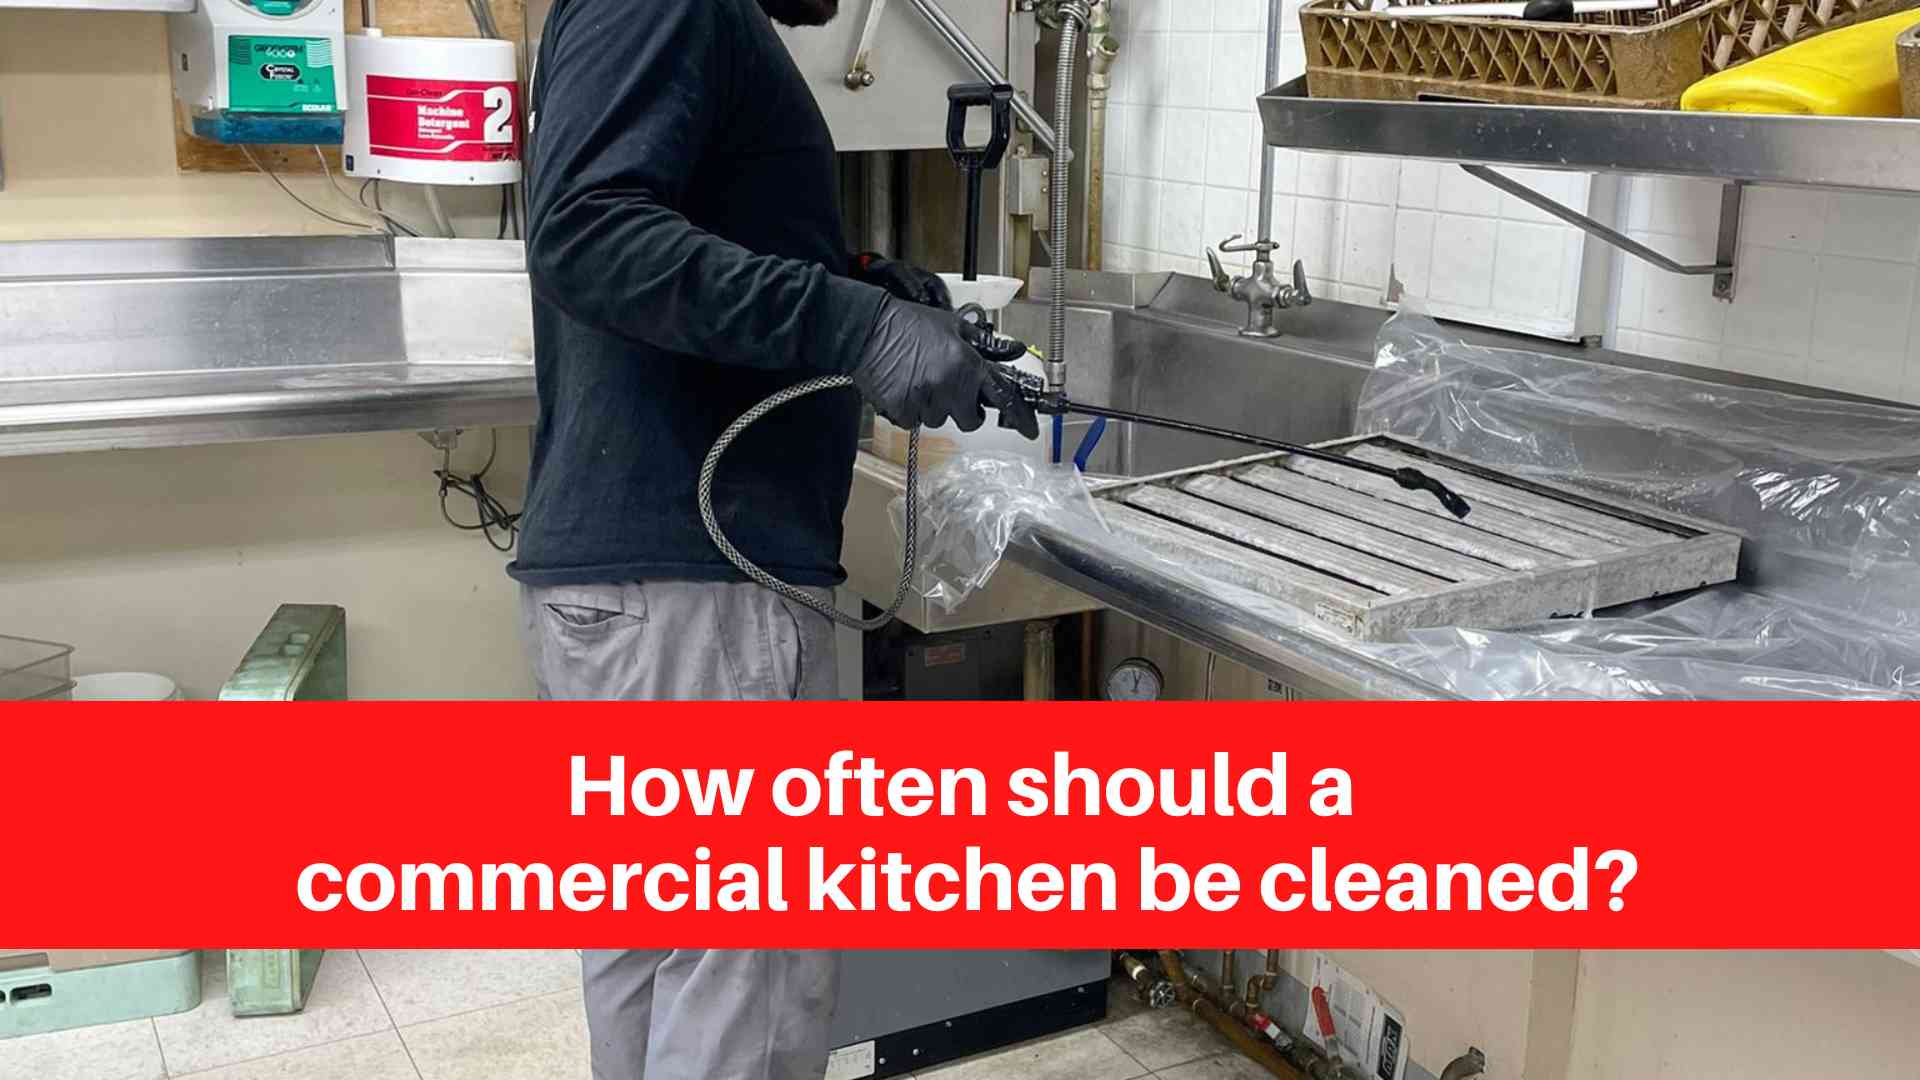 How often should a commercial kitchen be cleaned